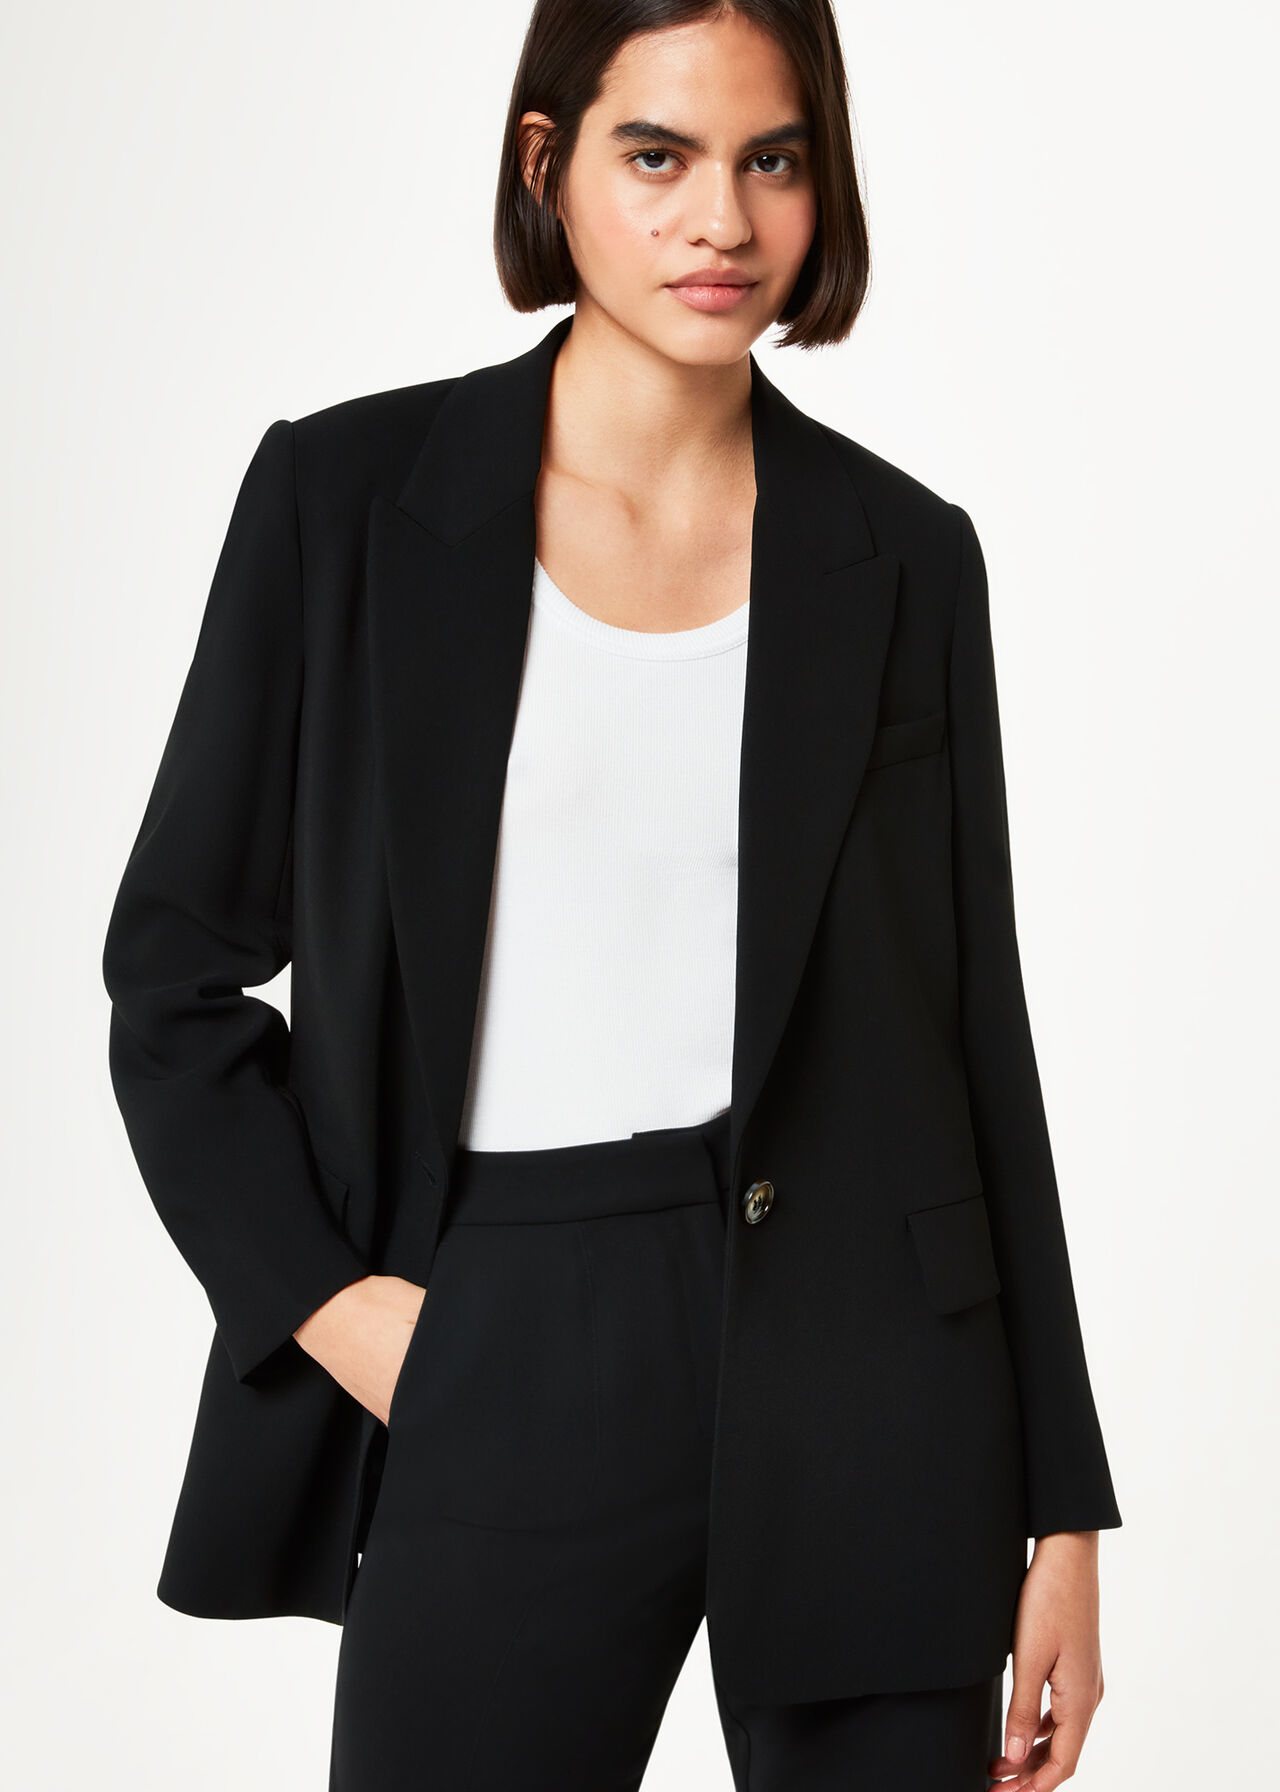 Black Boyfriend Blazer in a Relaxed Fit | Whistles